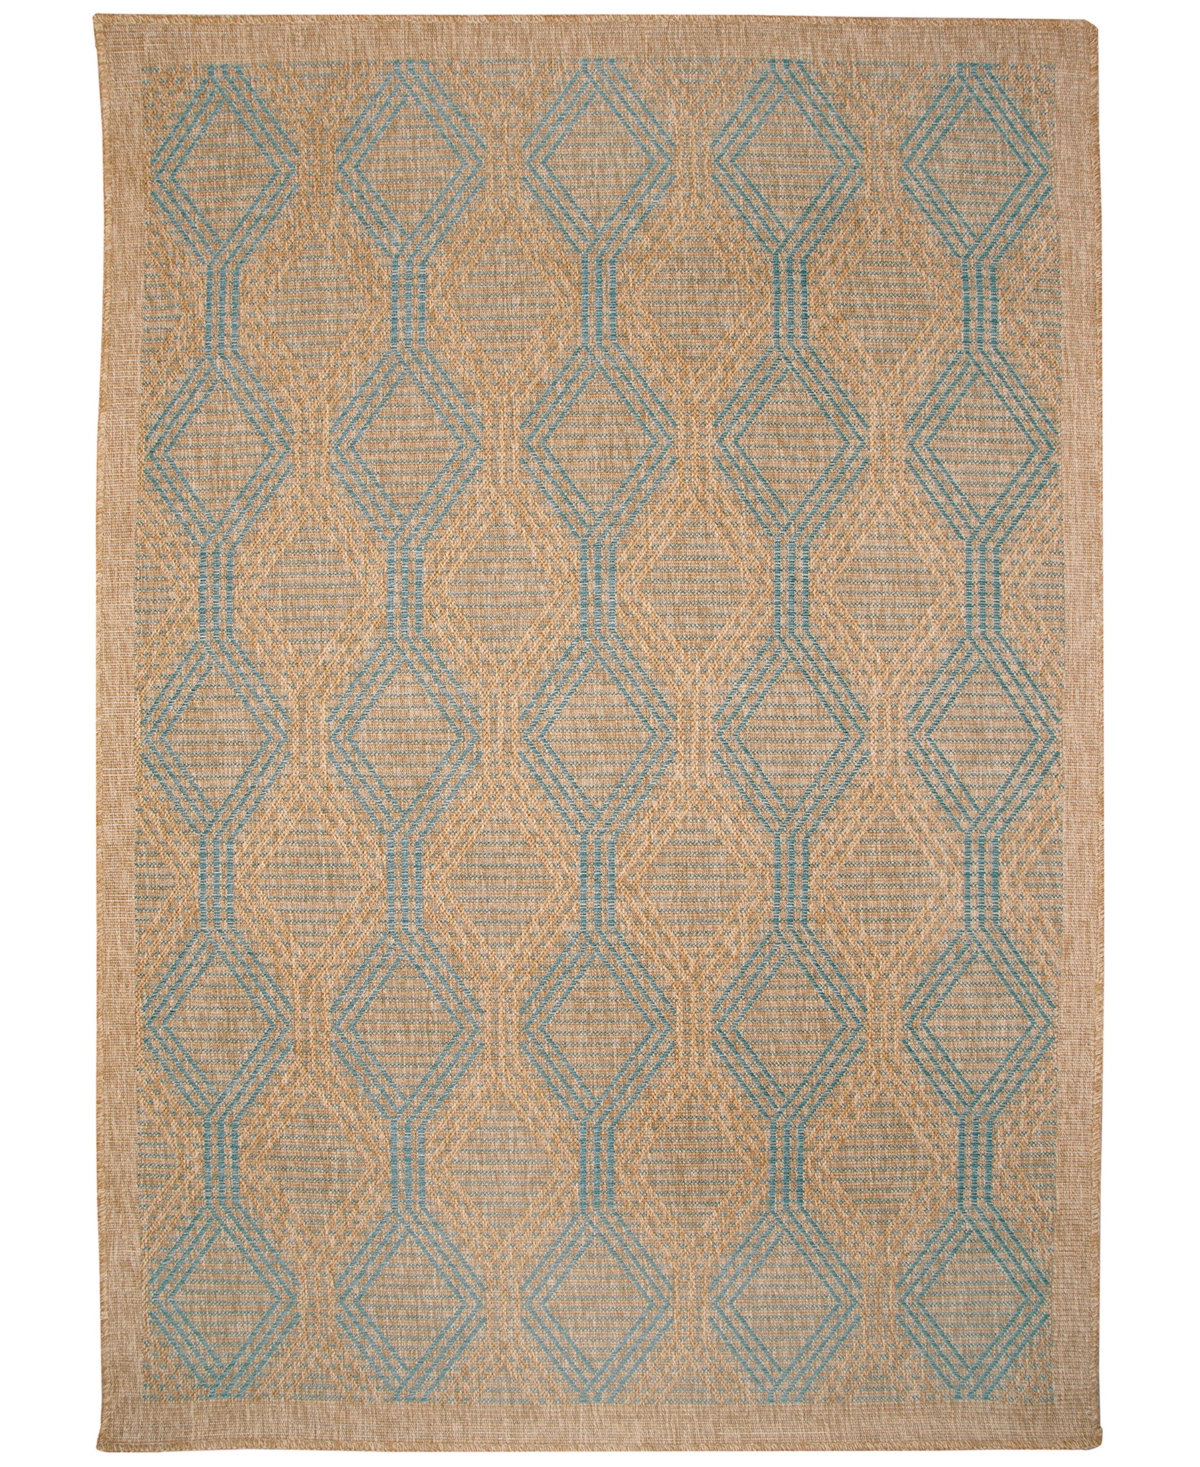 Liora Manne Sahara Links 3'3" X 4'11" Outdoor Area Rug In Turquoise